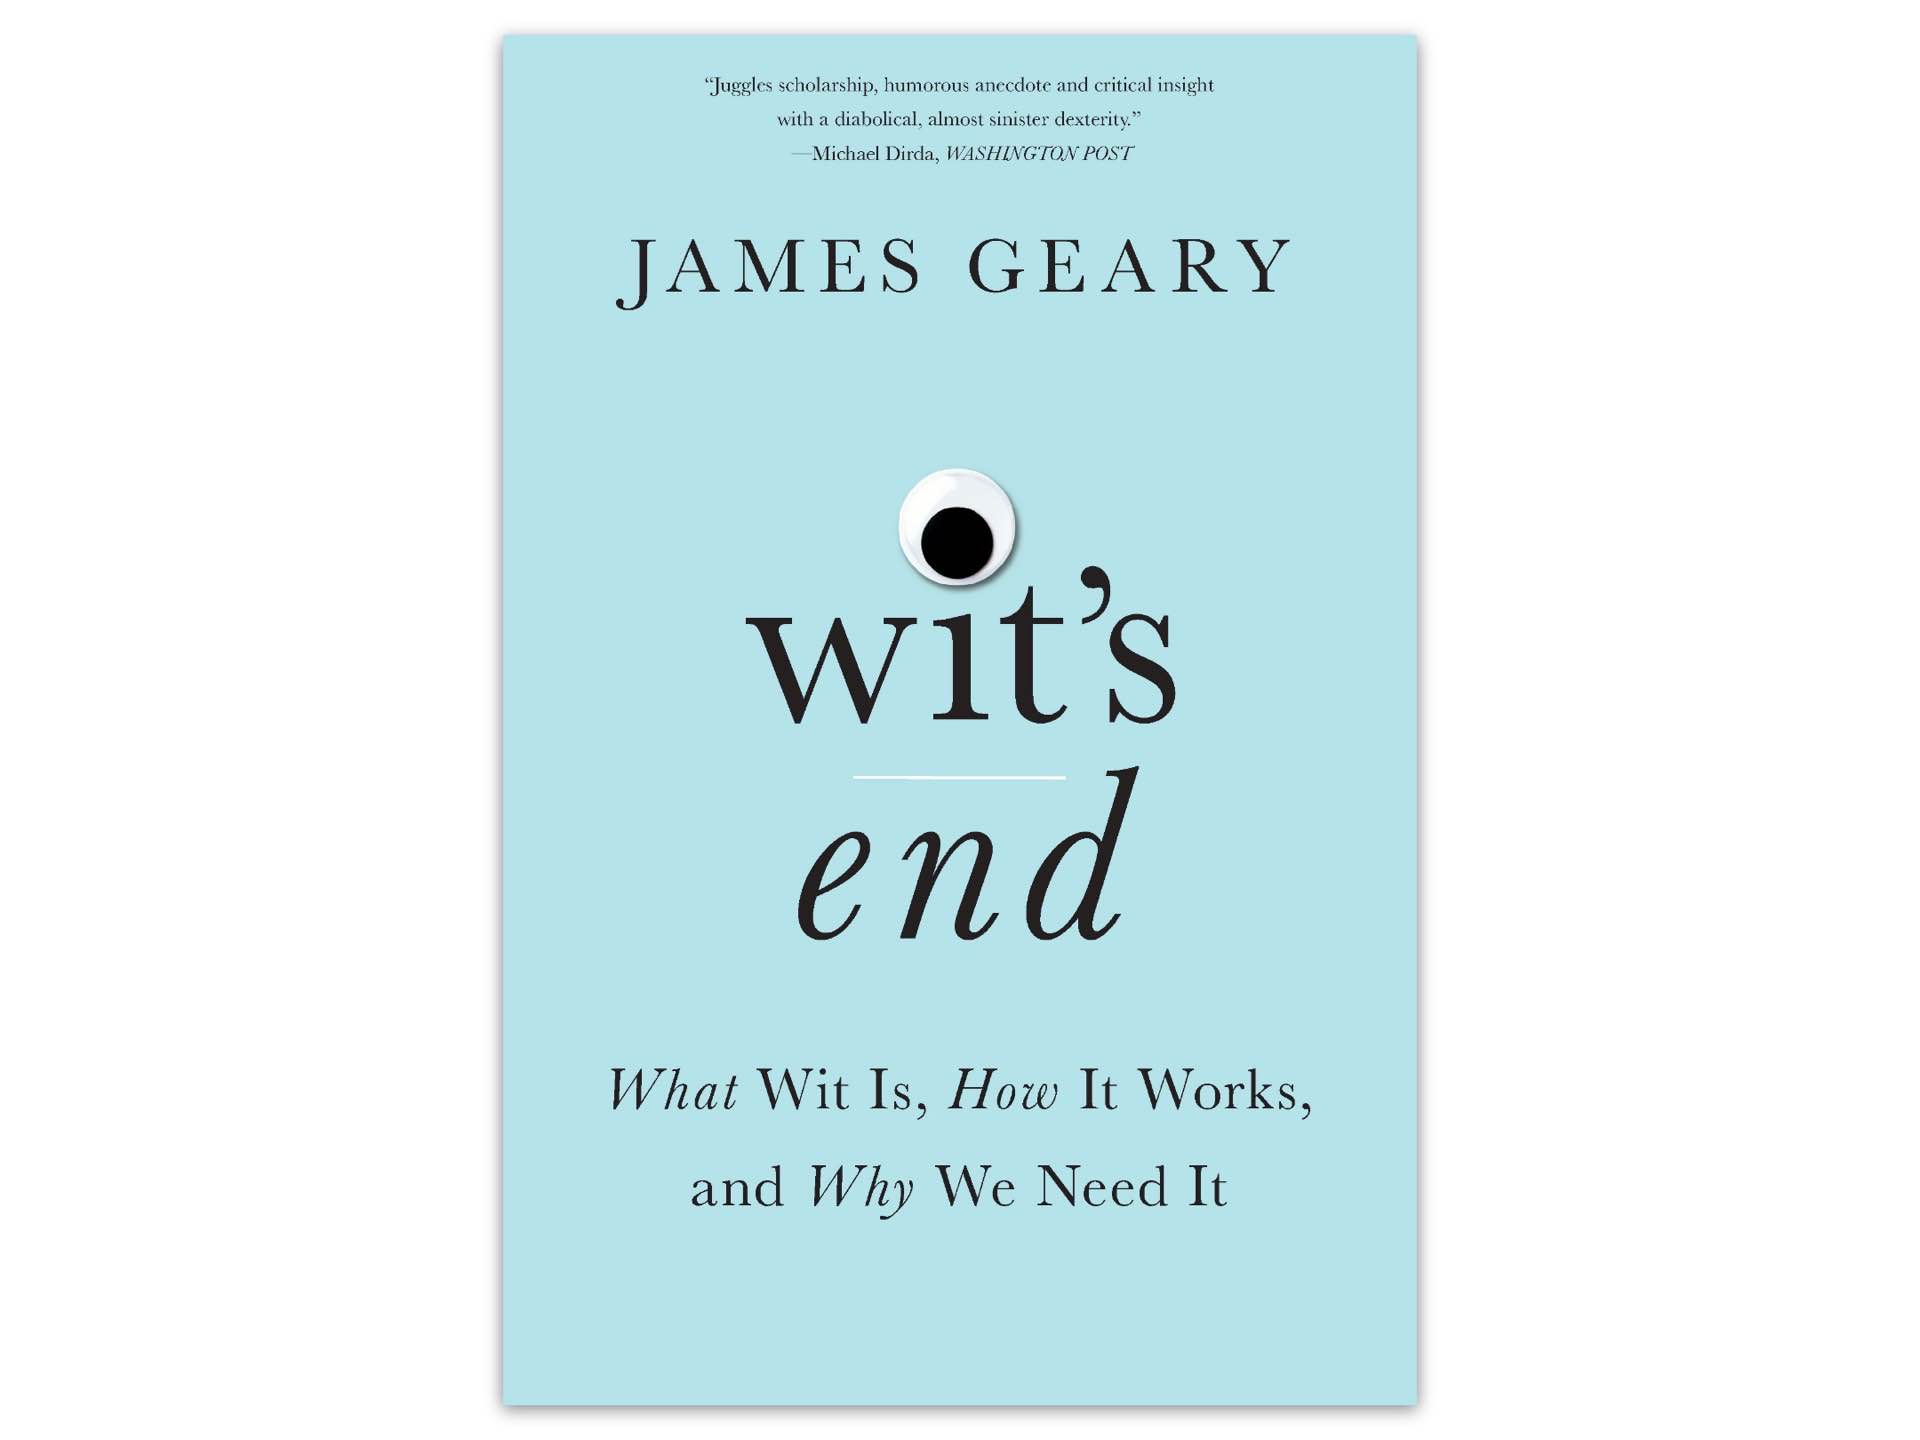 wits-end-by-james-geary